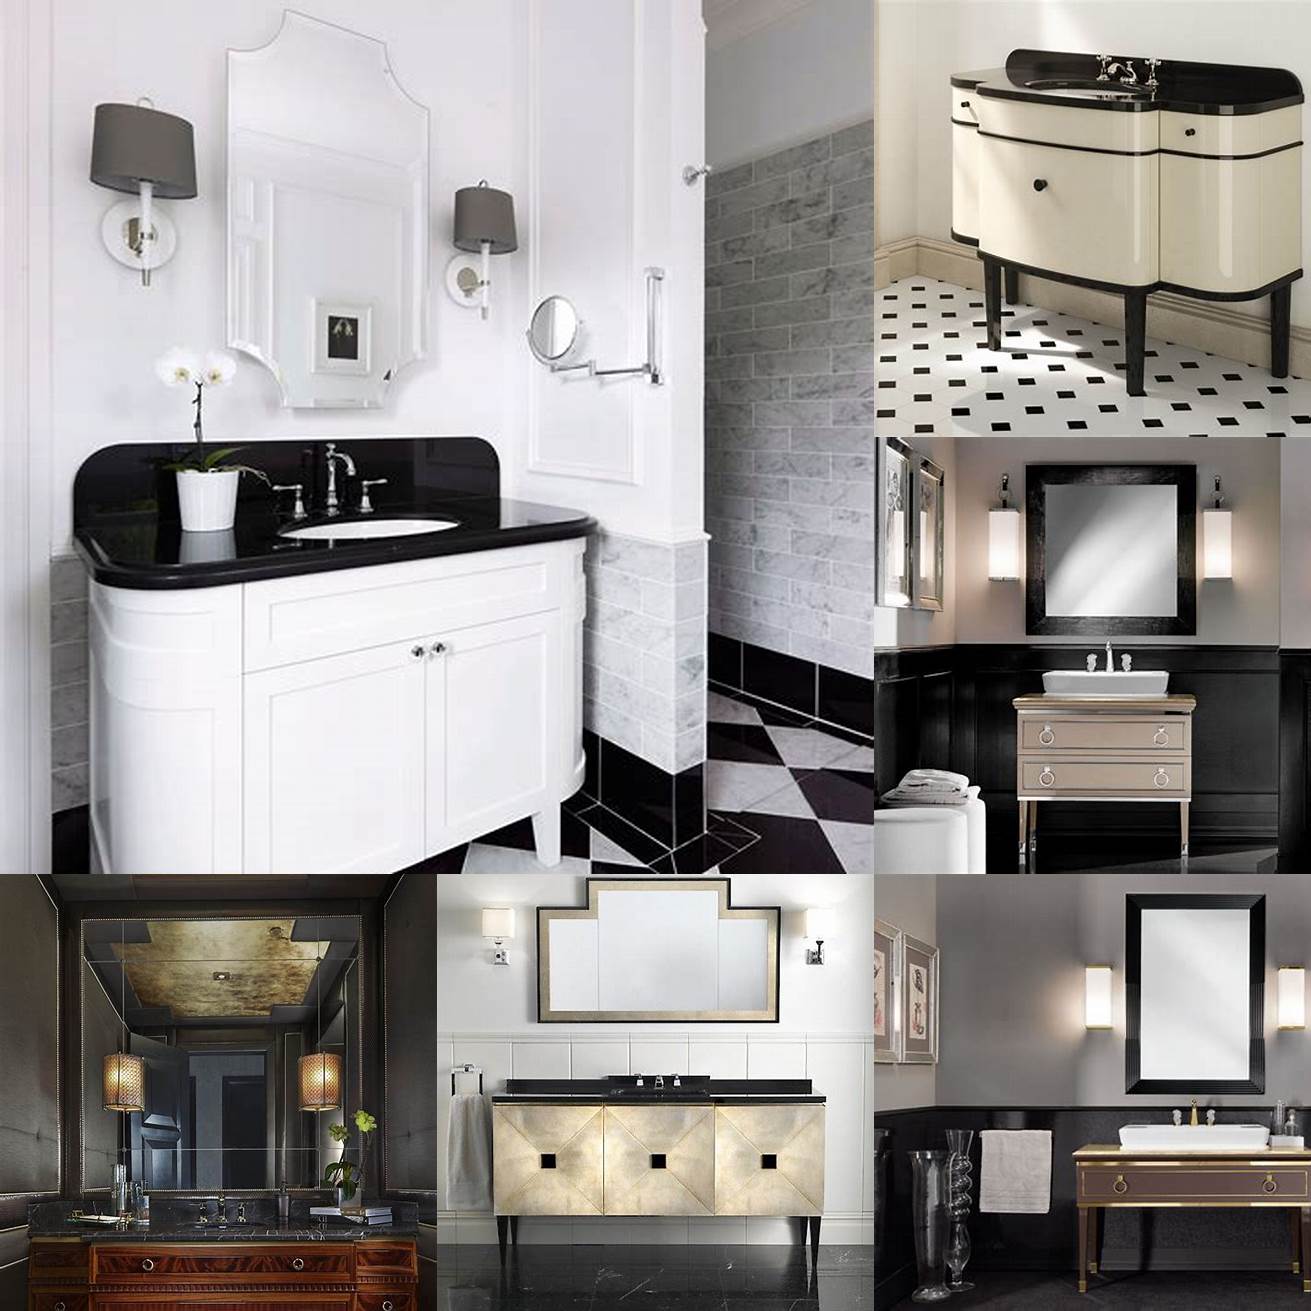 This Art Deco Bathroom Vanity features a sleek and streamlined design with metallic accents